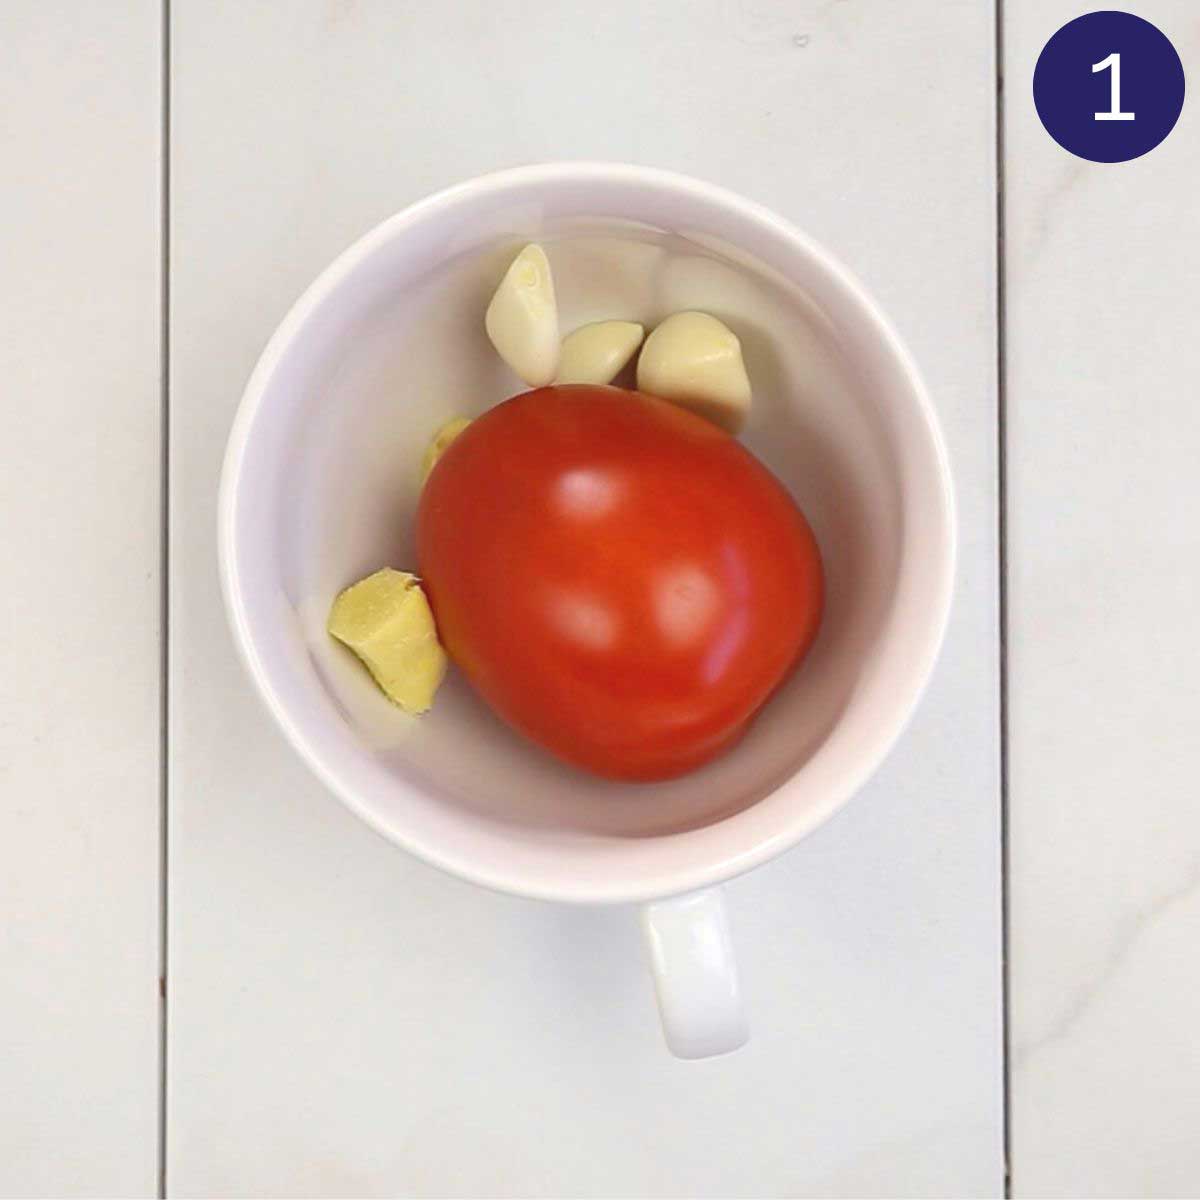 One red tomato, garlic cloves and ginger pieces in a mixing cup.